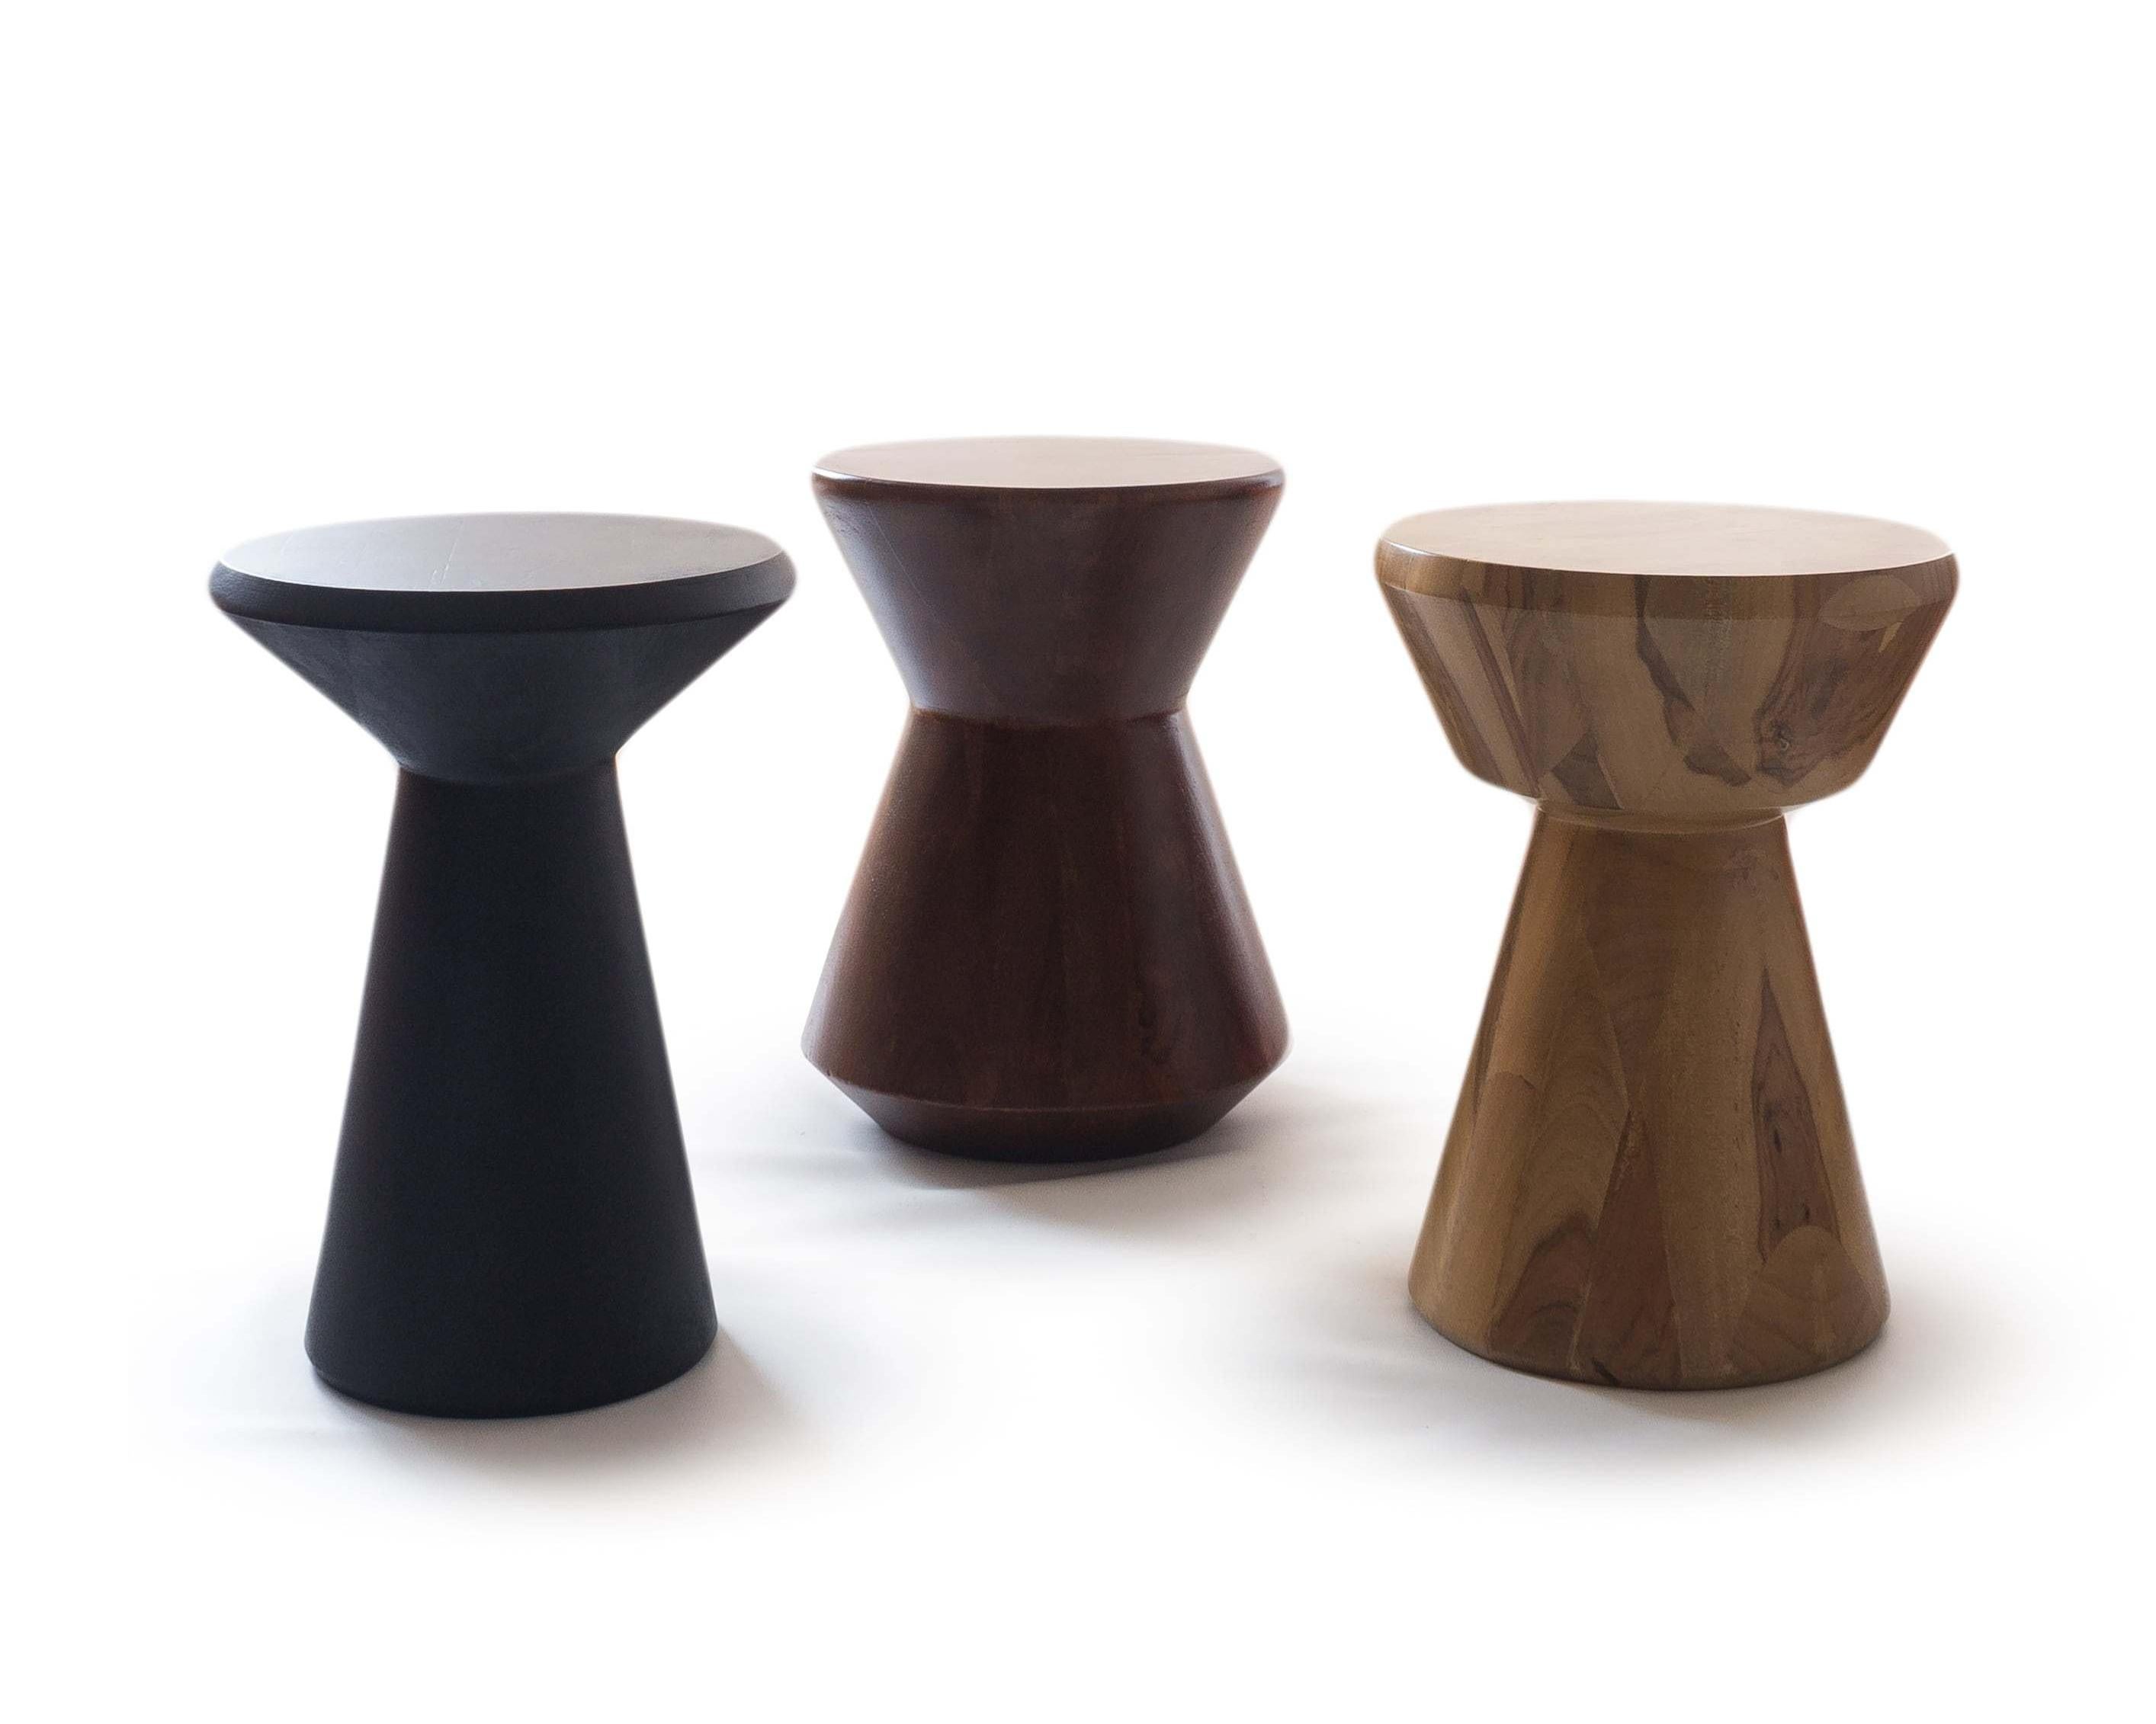 Modern Stool, by Camilo Andres Rodriguez Marquez